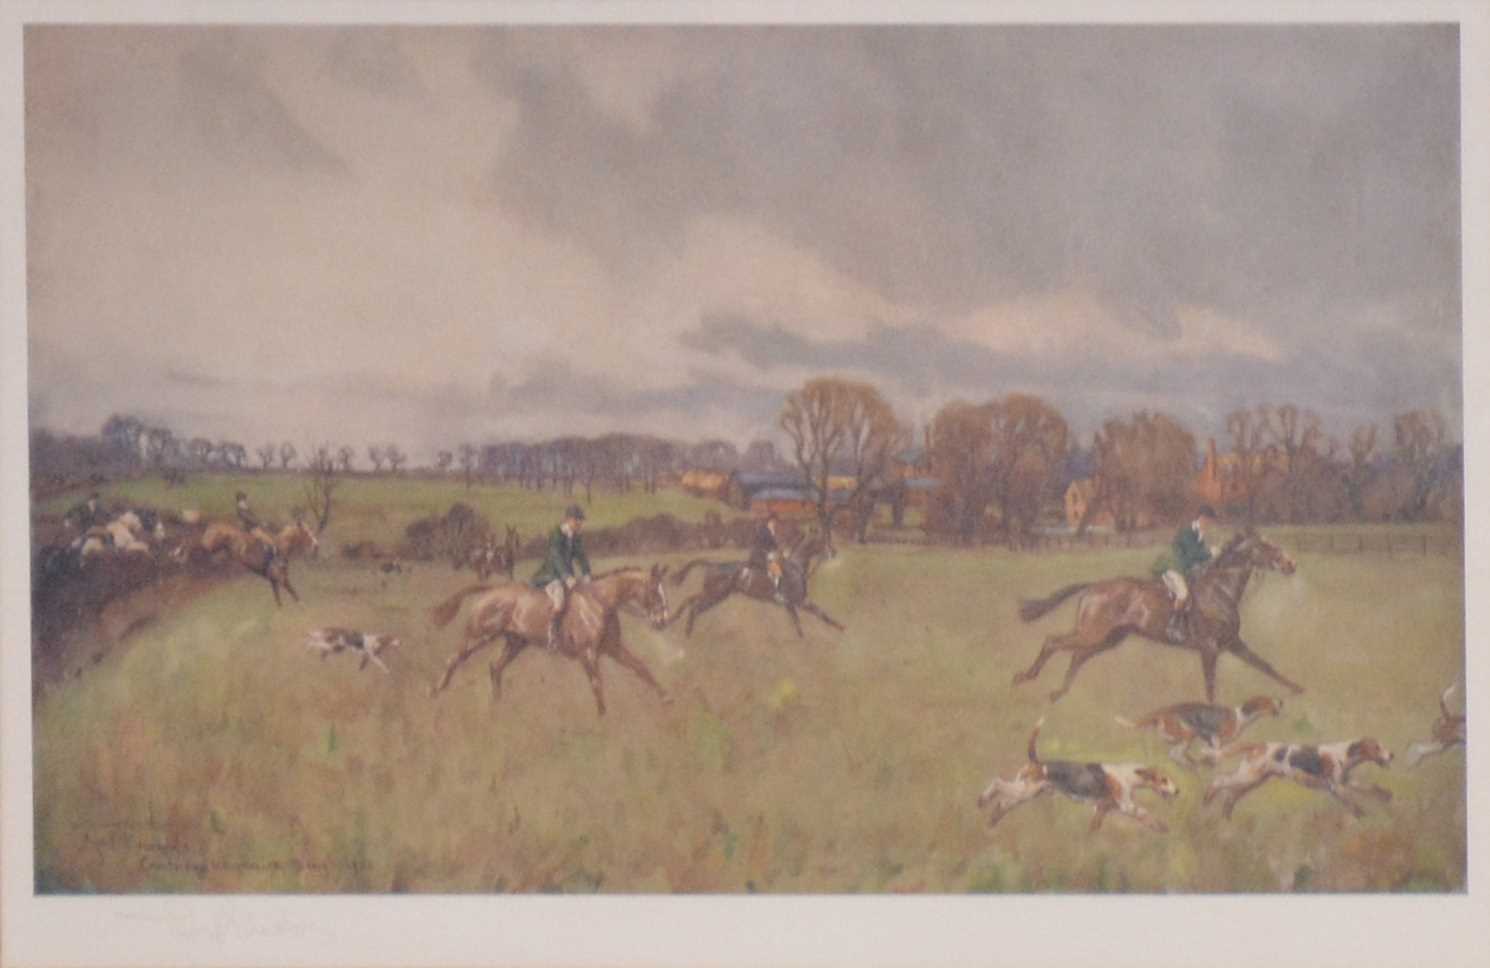 After Lionel Edwards, Hunting Countries - The Cotswold and The Waddon Chase, and other prints. - Image 11 of 14